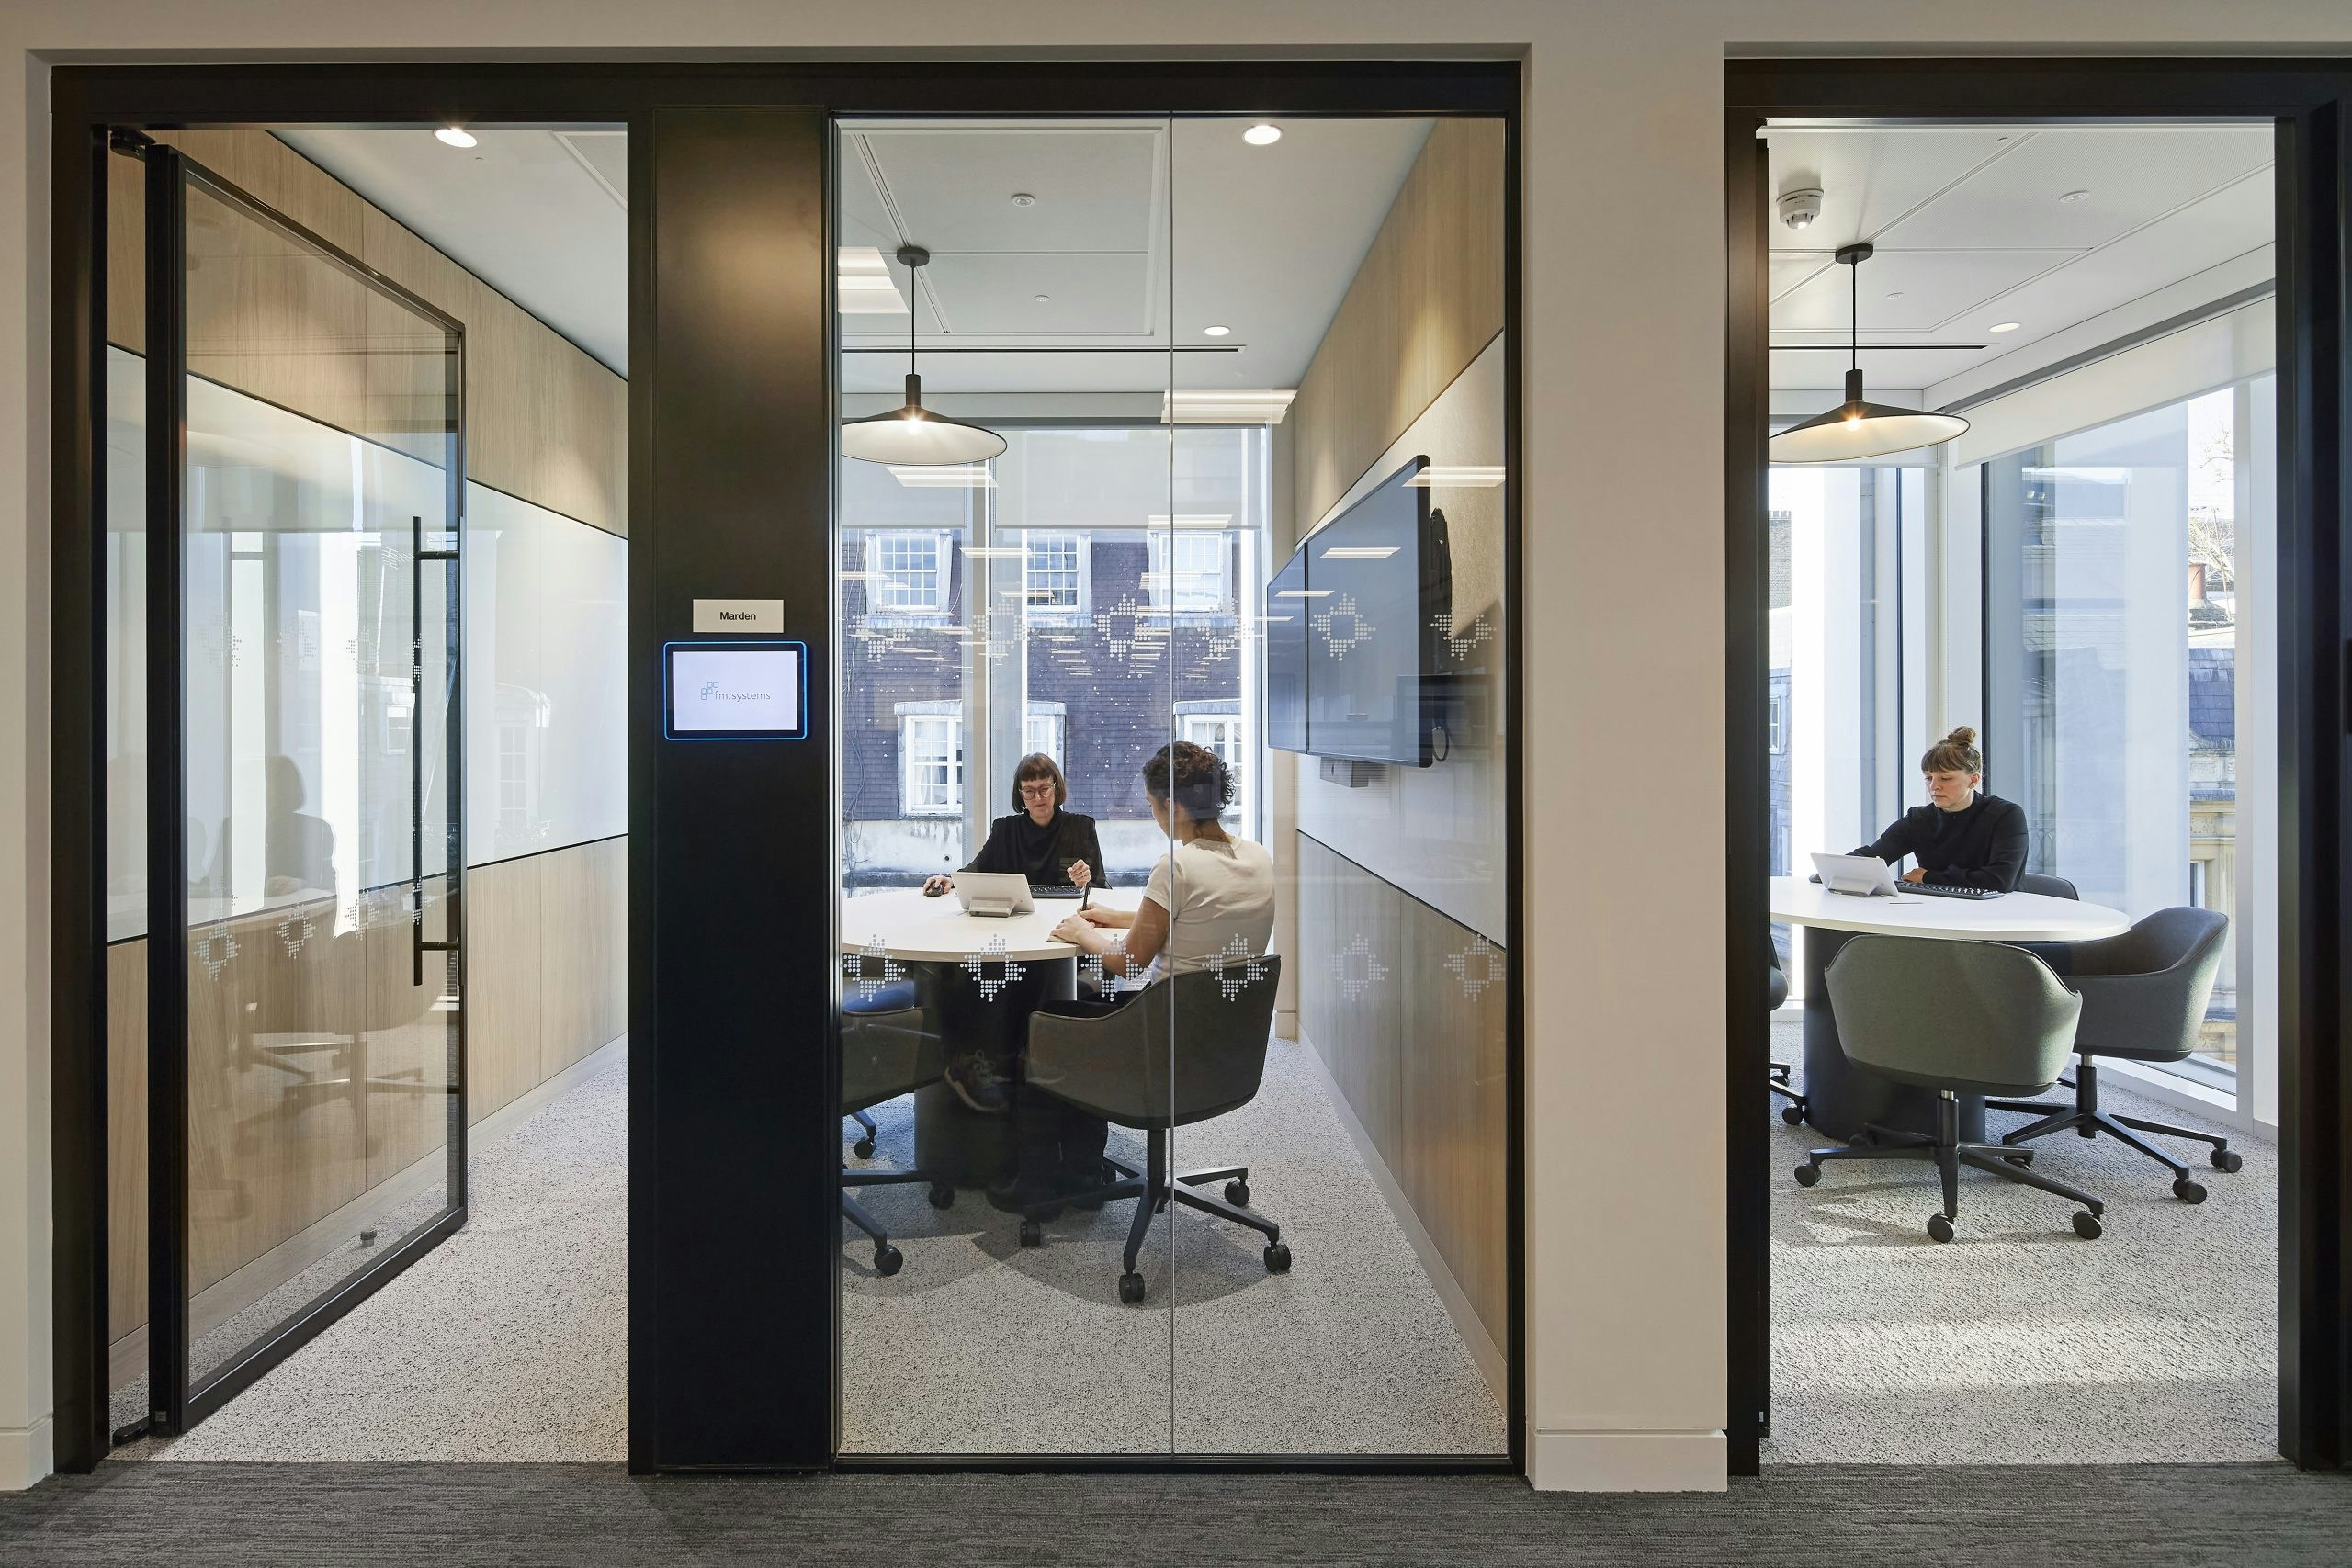 Balancing Privacy and Connectivity - The Modern Glass-Walled Meeting Room